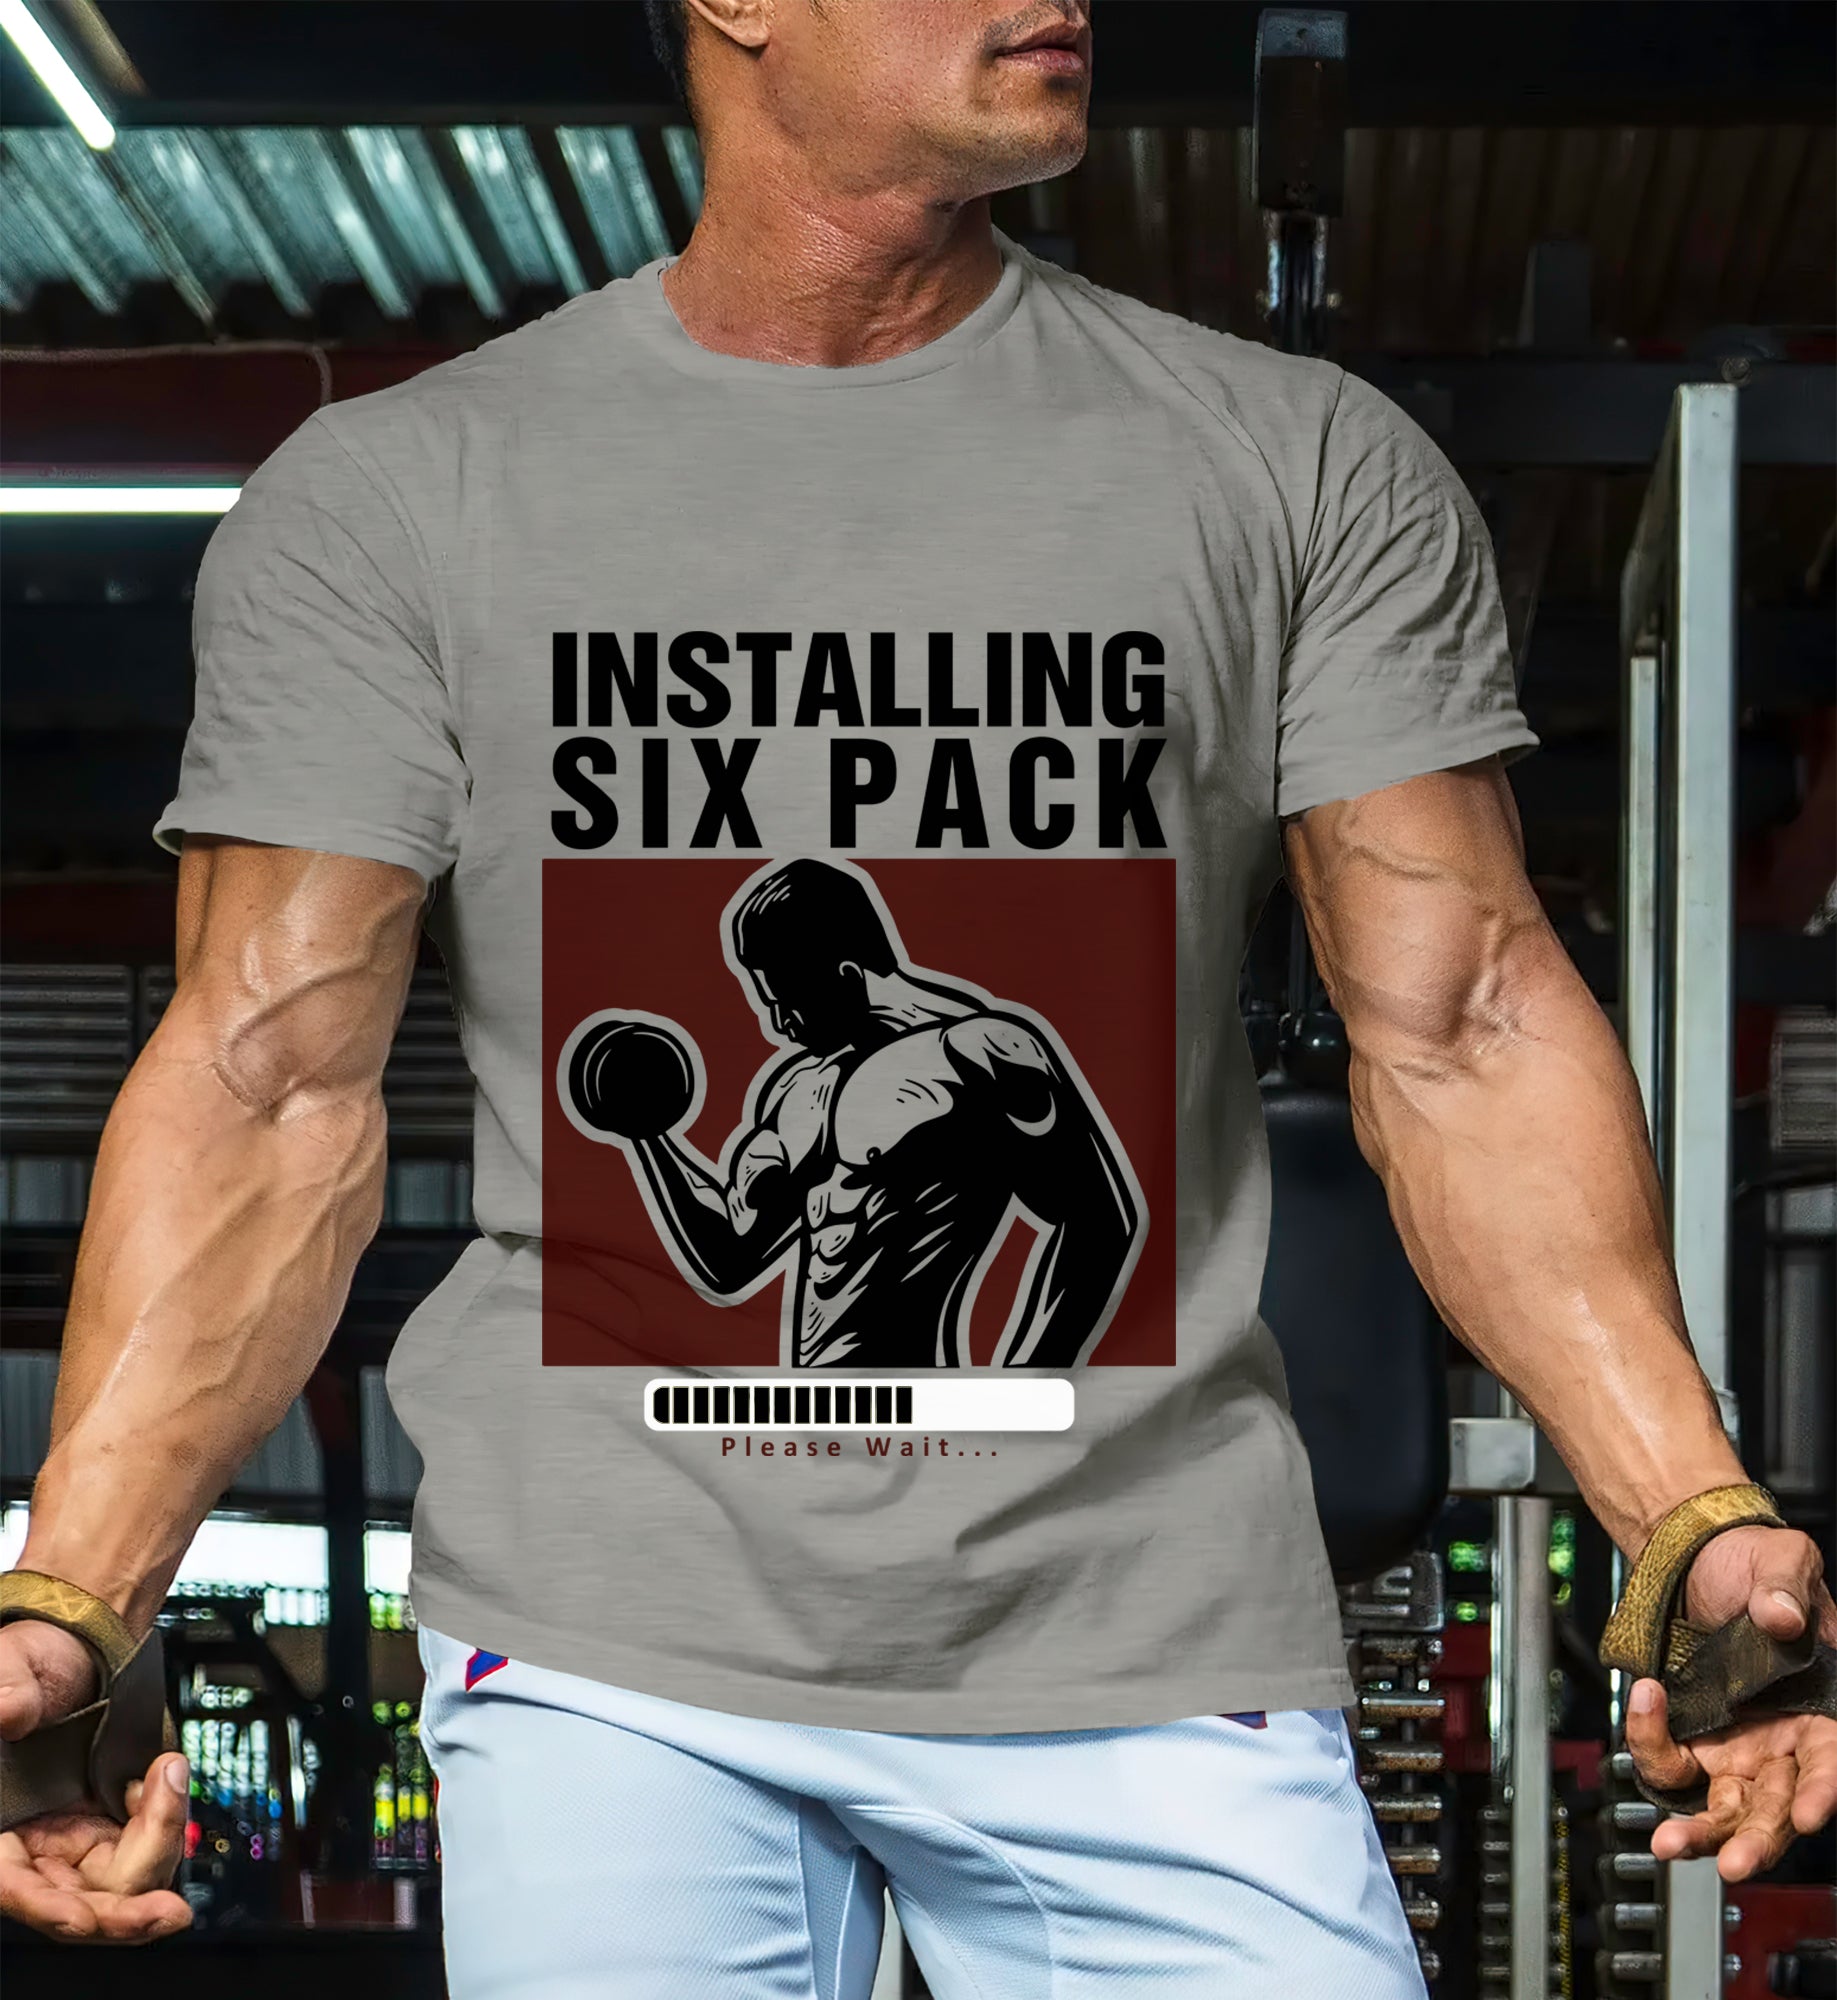 Installing for six pack T-shirt Gym Man Muscle